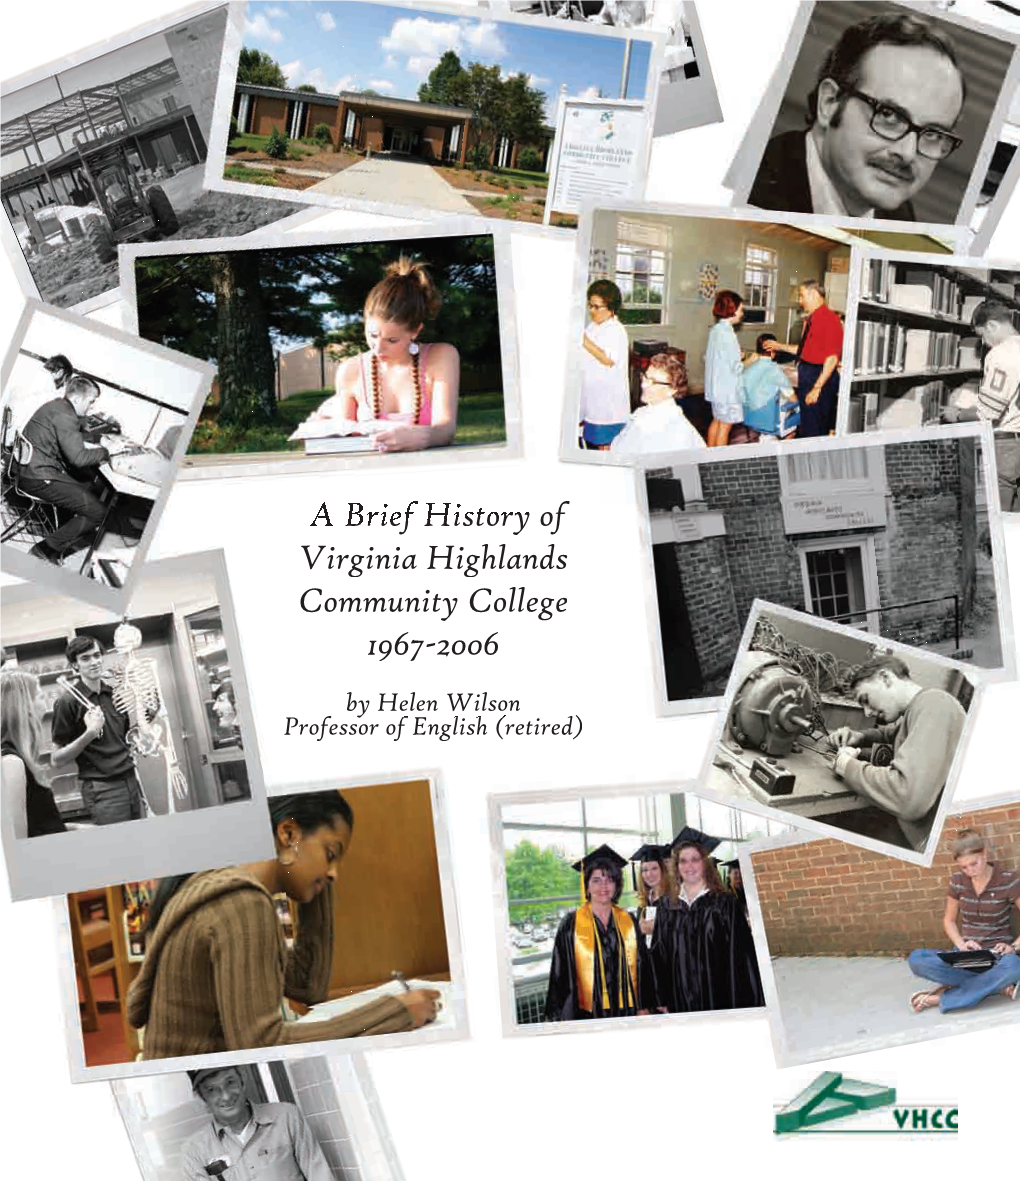 A Brief History of Virginia Highlands Community College 1967-2006